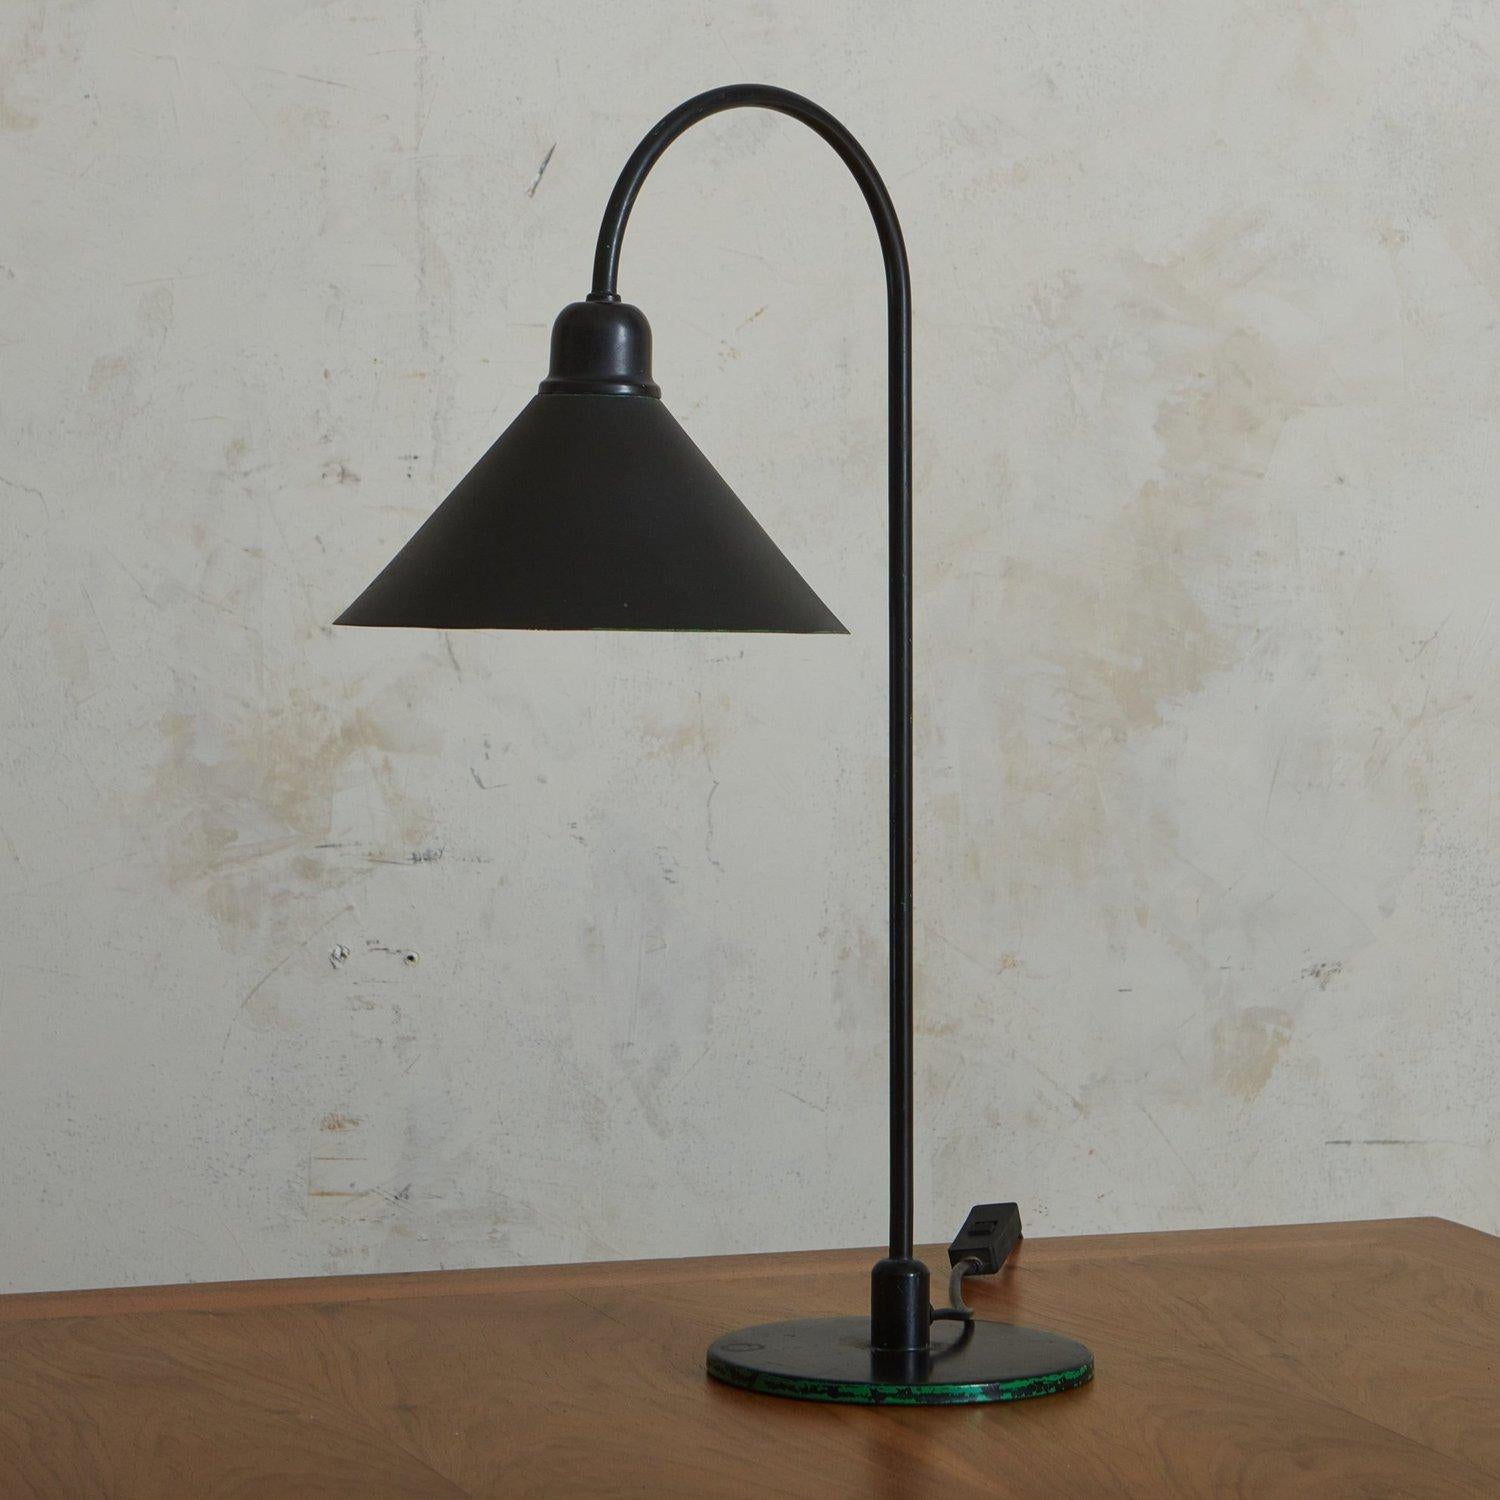 A vintage French black metal desk lamp featuring a curved tubular body with a circular base and a sleek shade. It has a black cord and inline switch. Sourced in France, 20th Century.

DIMENSIONS: 6.5”W x 14”D x 21.5”H; 6.5